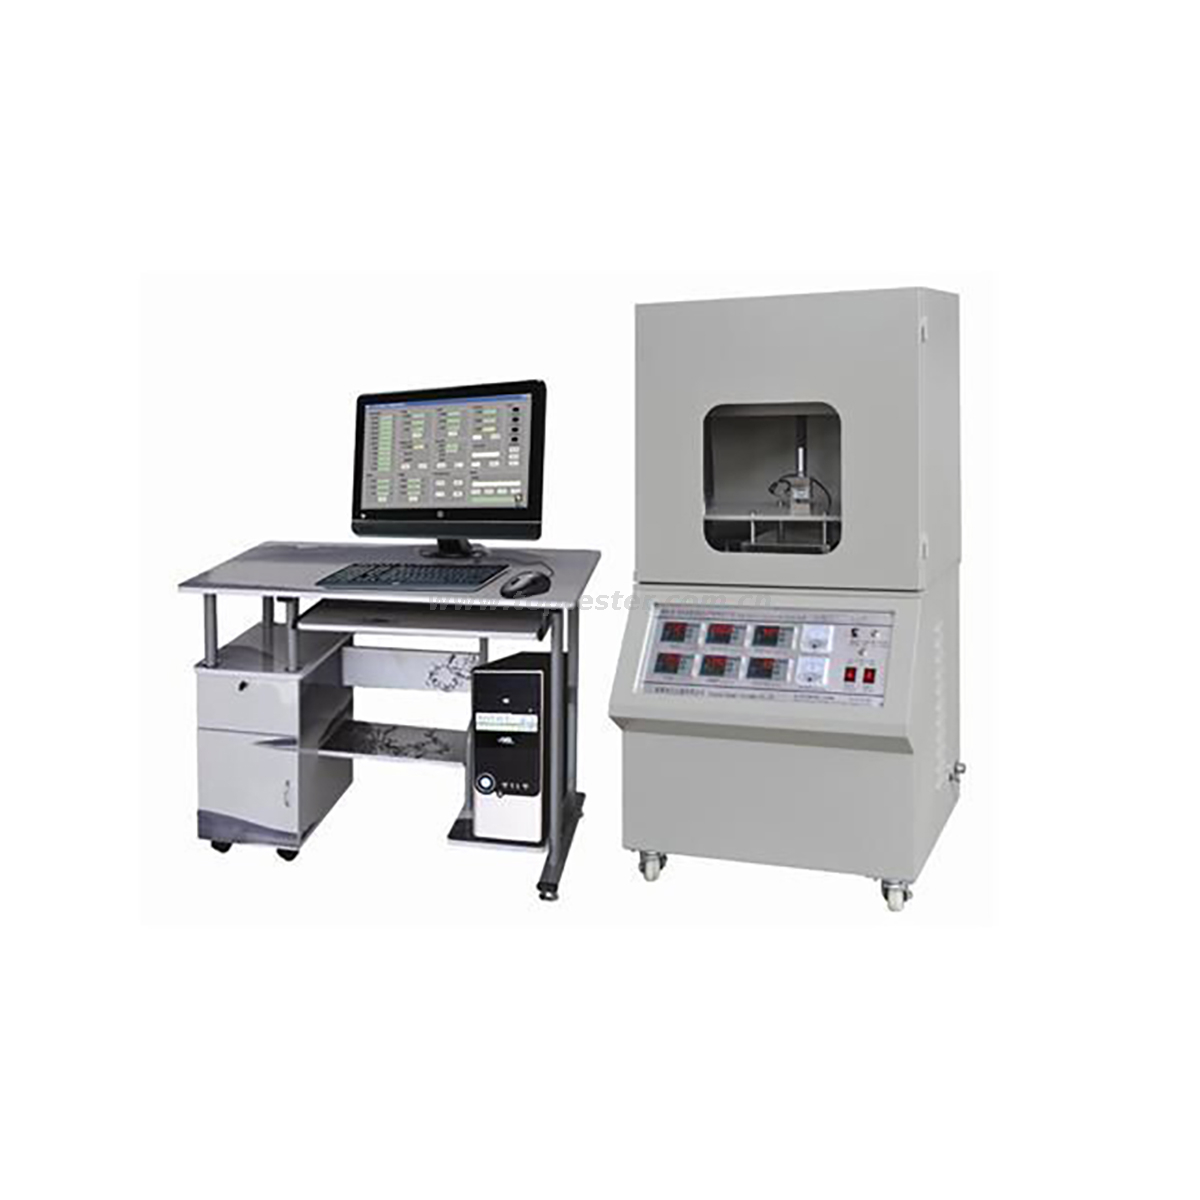 ASTM C518 High Precision Thermal Conductivity Tester TP-III (including Computer)